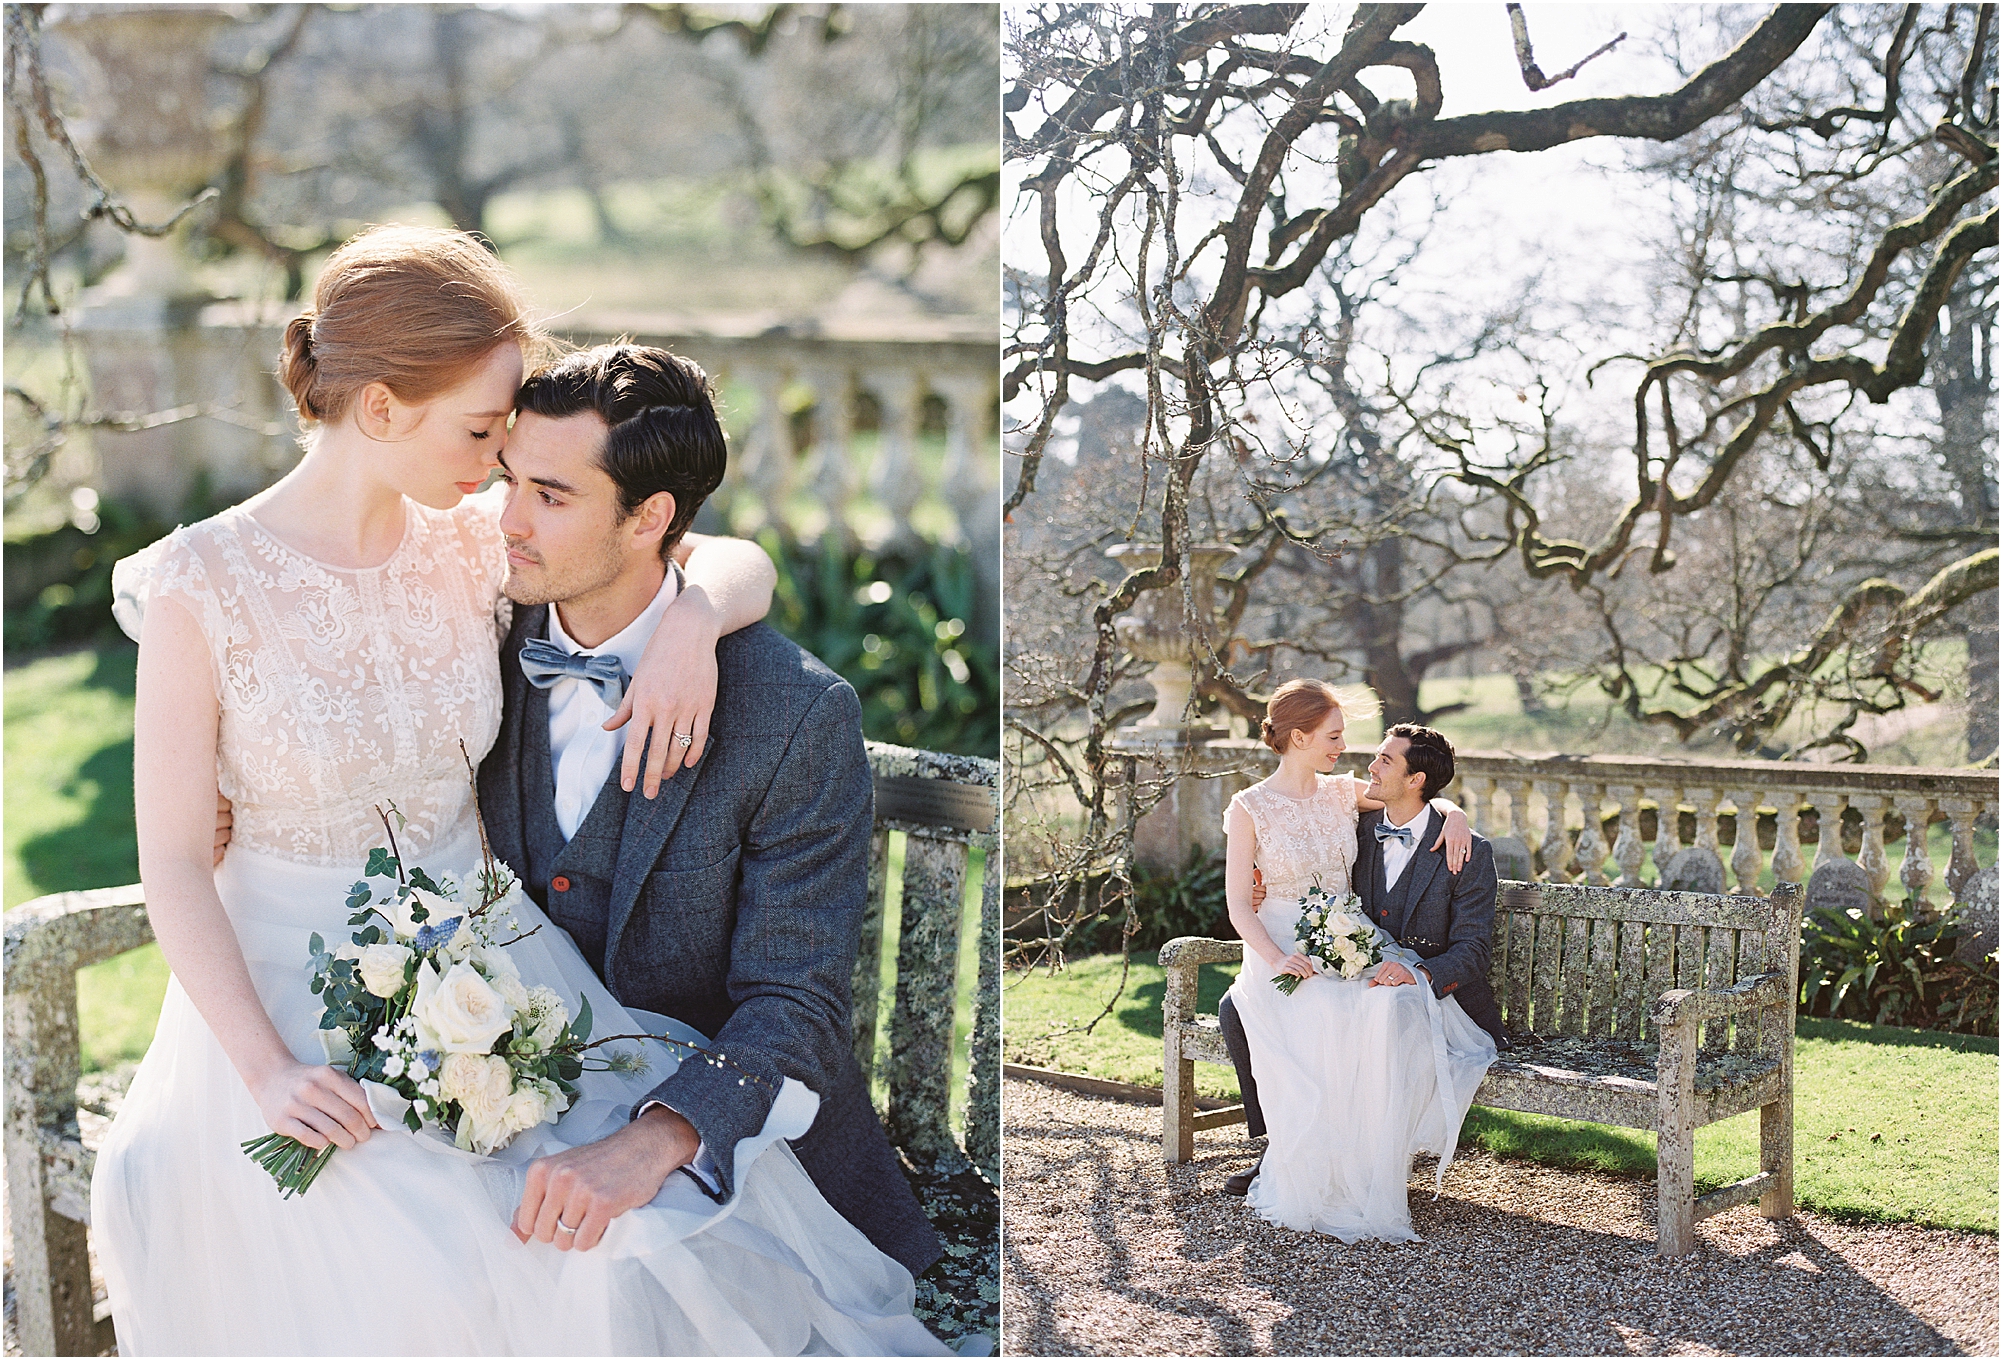 sophisticated bride and groom in the grounds of Somerley House Hampshire wedding venue